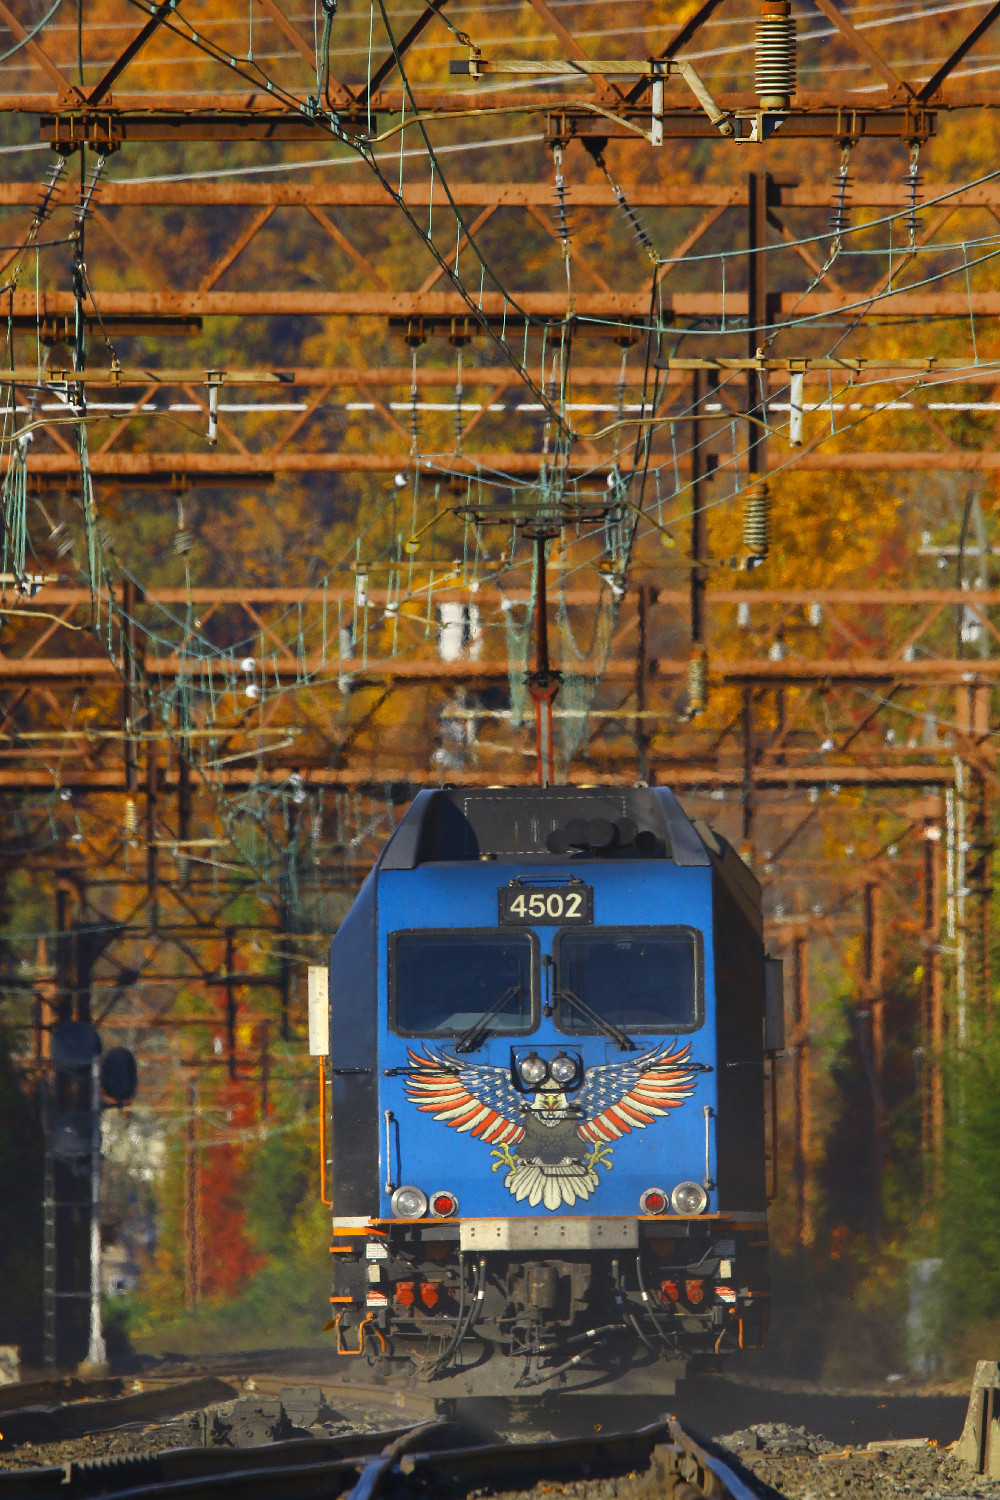 Blue electric passenger locomotive running under catanery. More Jersey-style eye candy